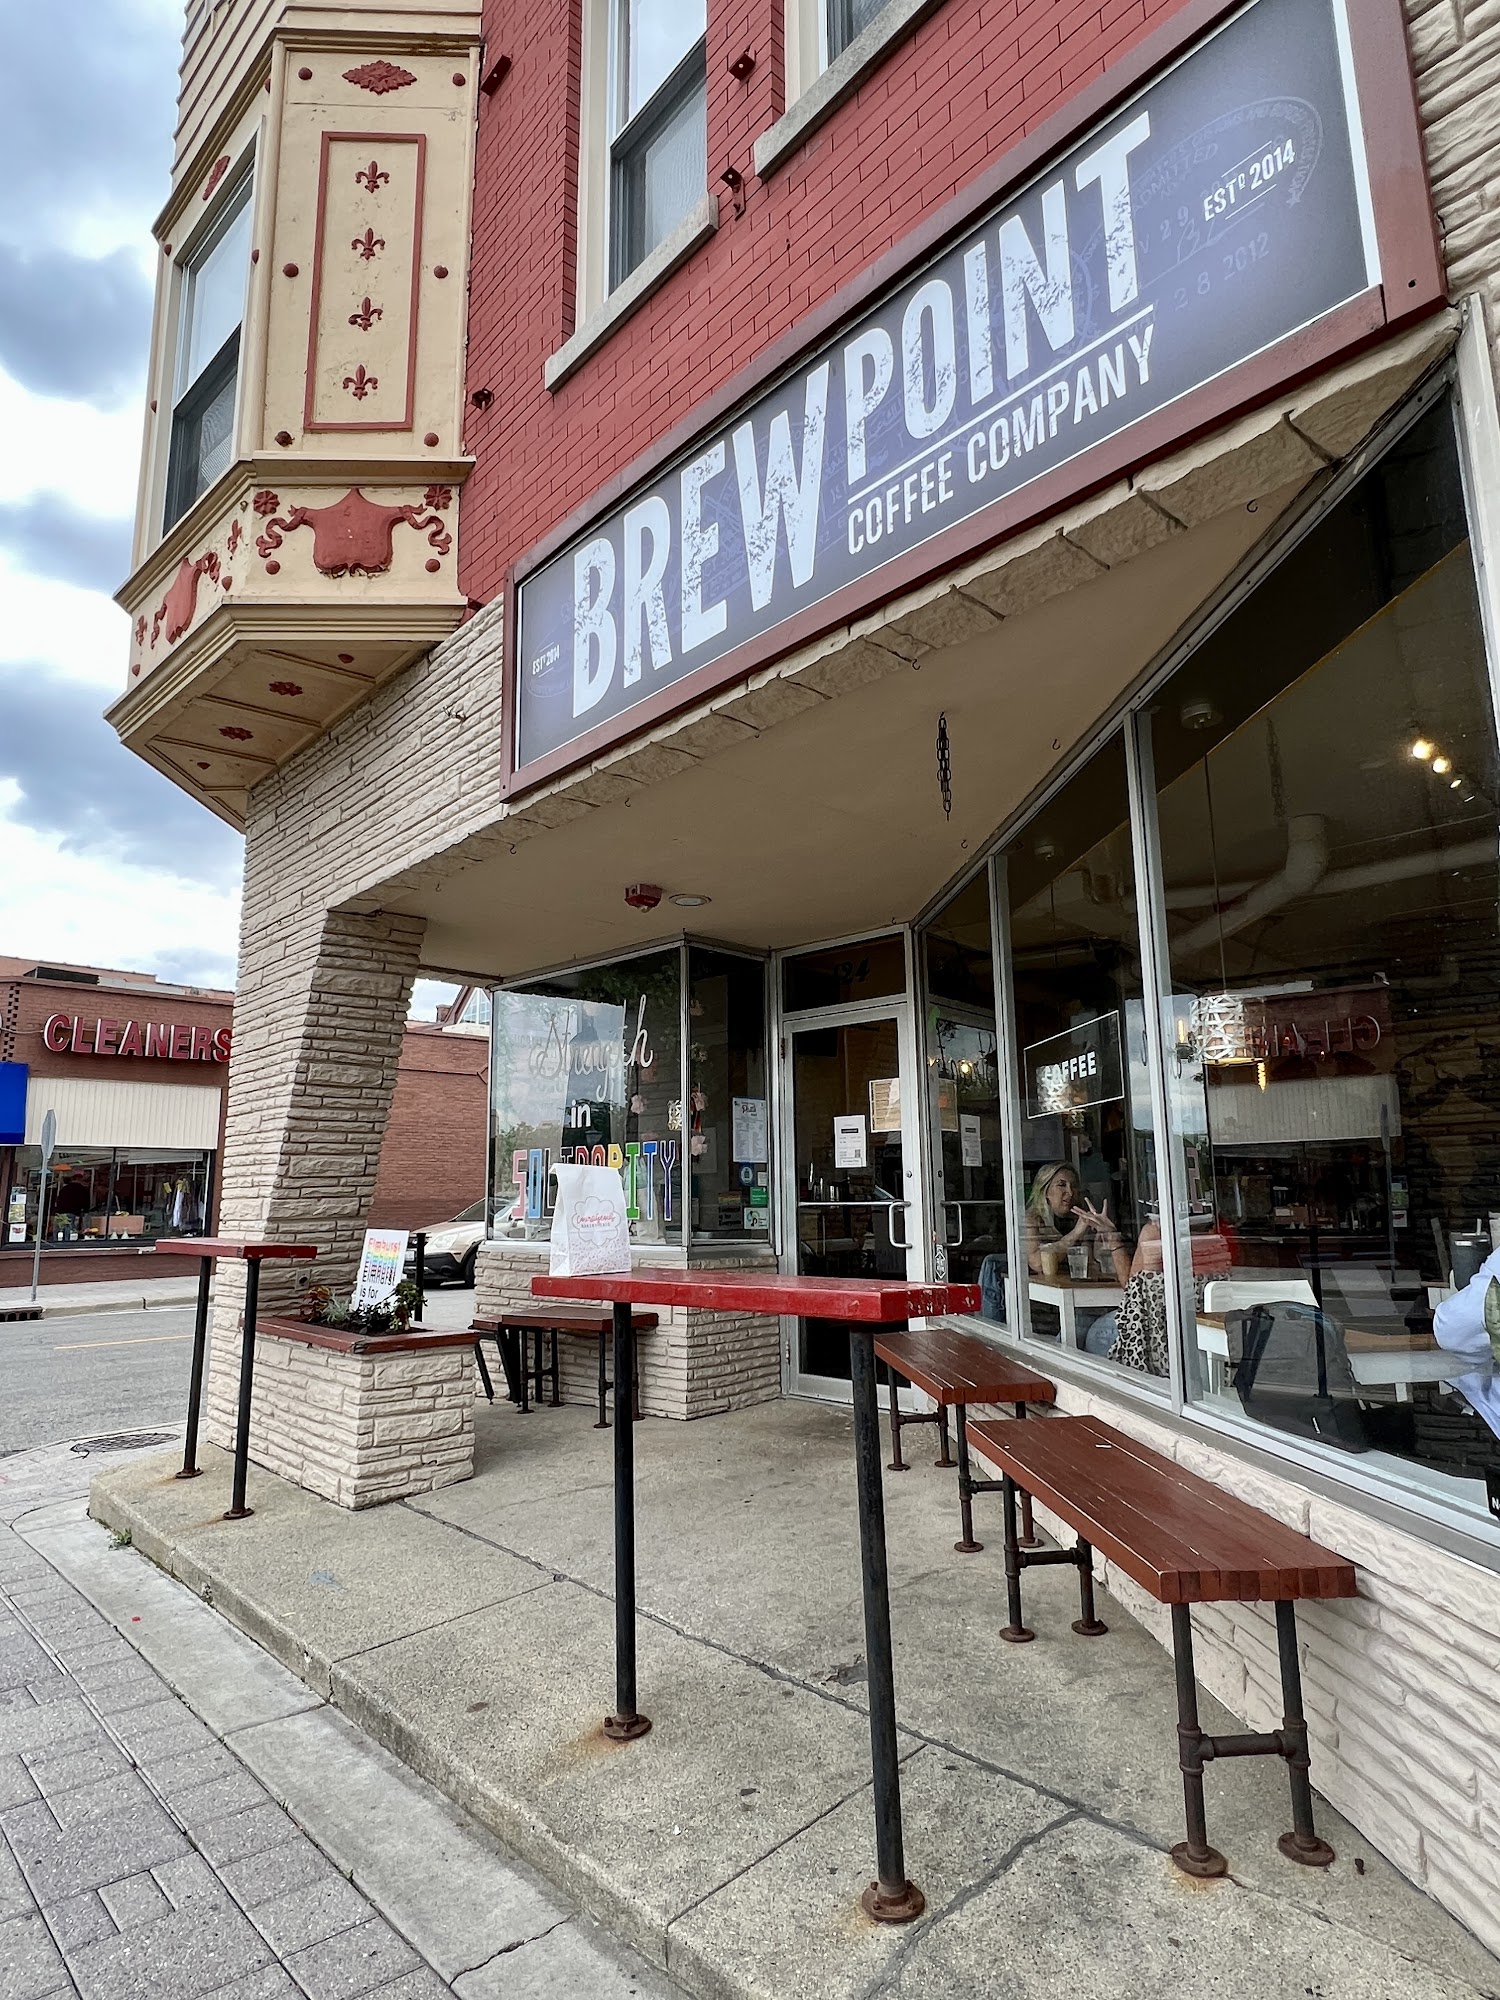 Brewpoint Coffee - Founder's Cafe